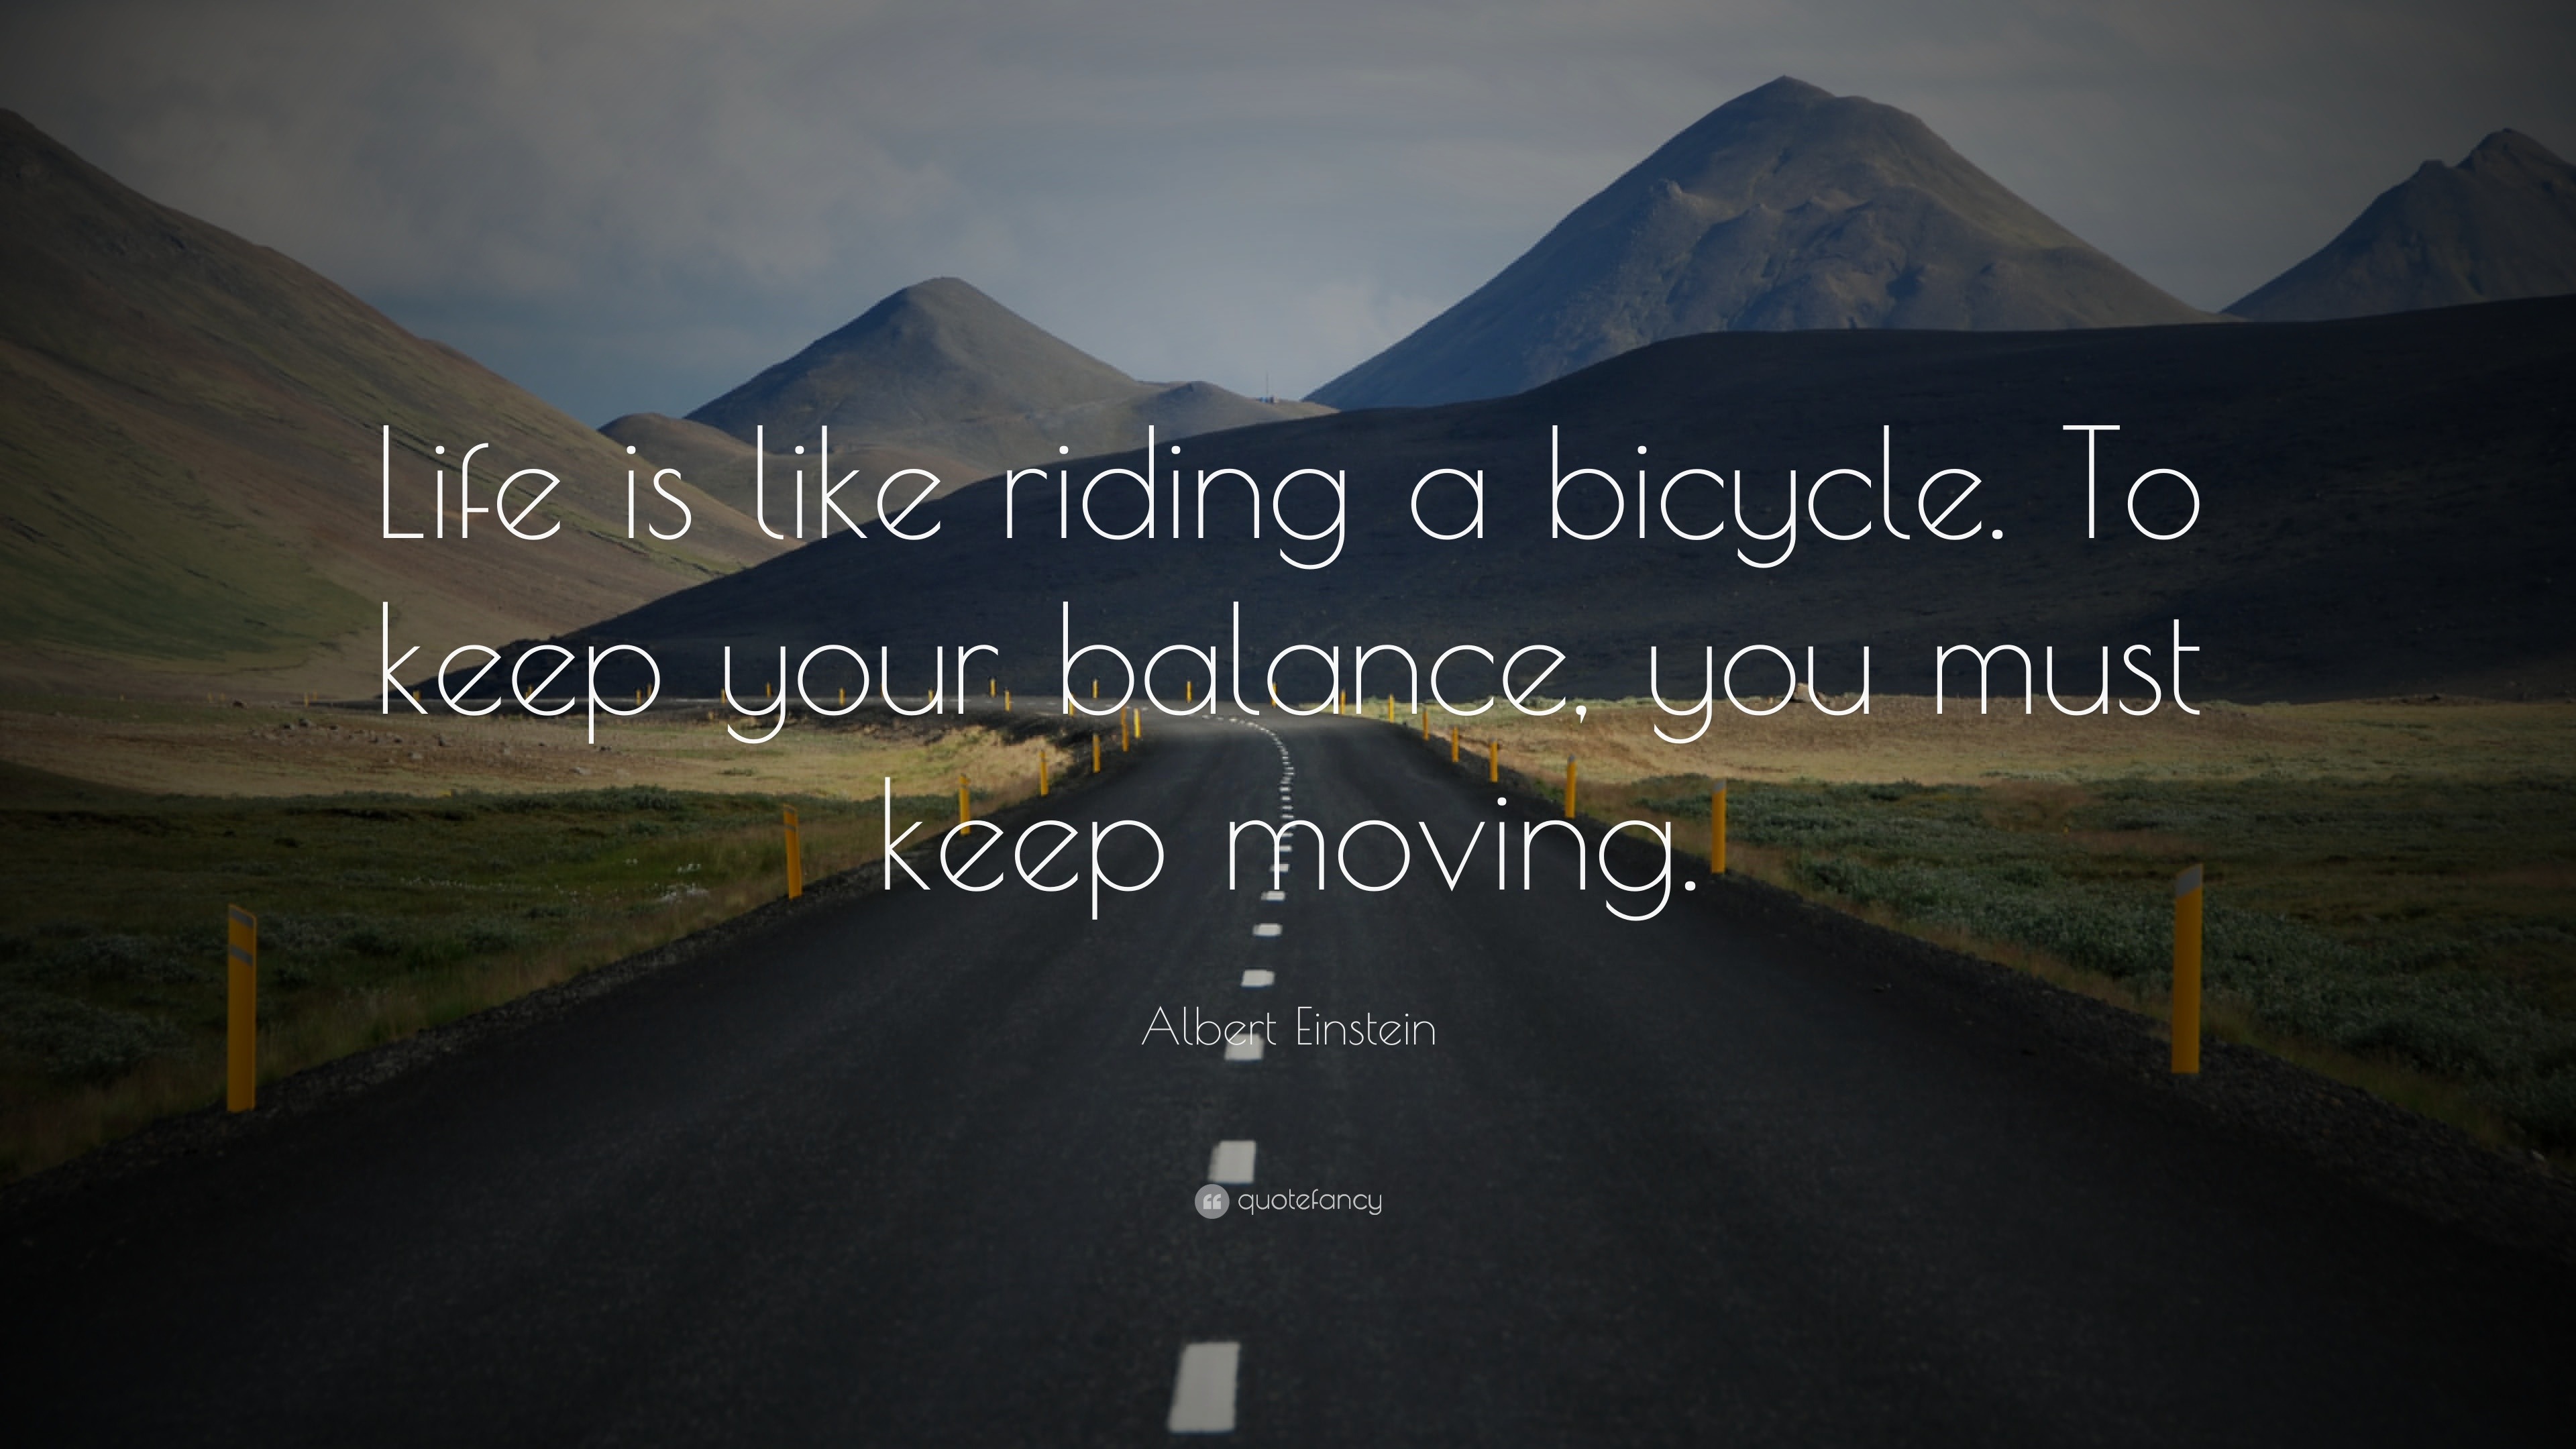 Albert Einstein Quote “life Is Like Riding A Bicycle To Keep Your Balance You Must Keep Moving”